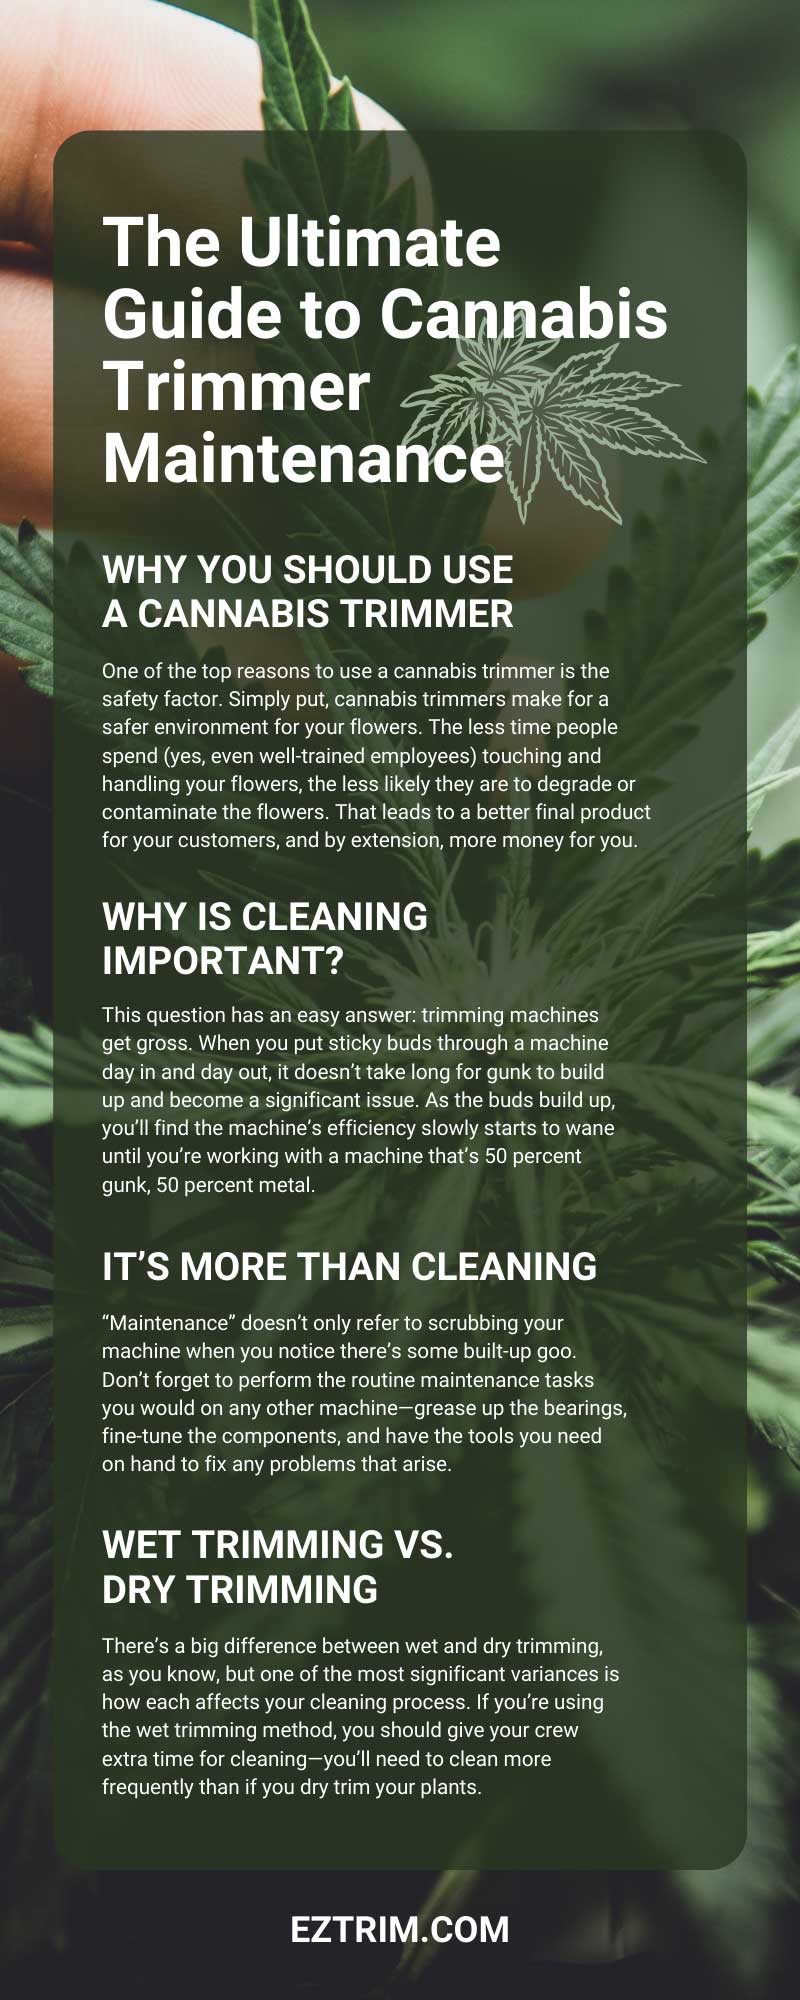 The Ultimate Guide to Cannabis Trimmer Maintenance